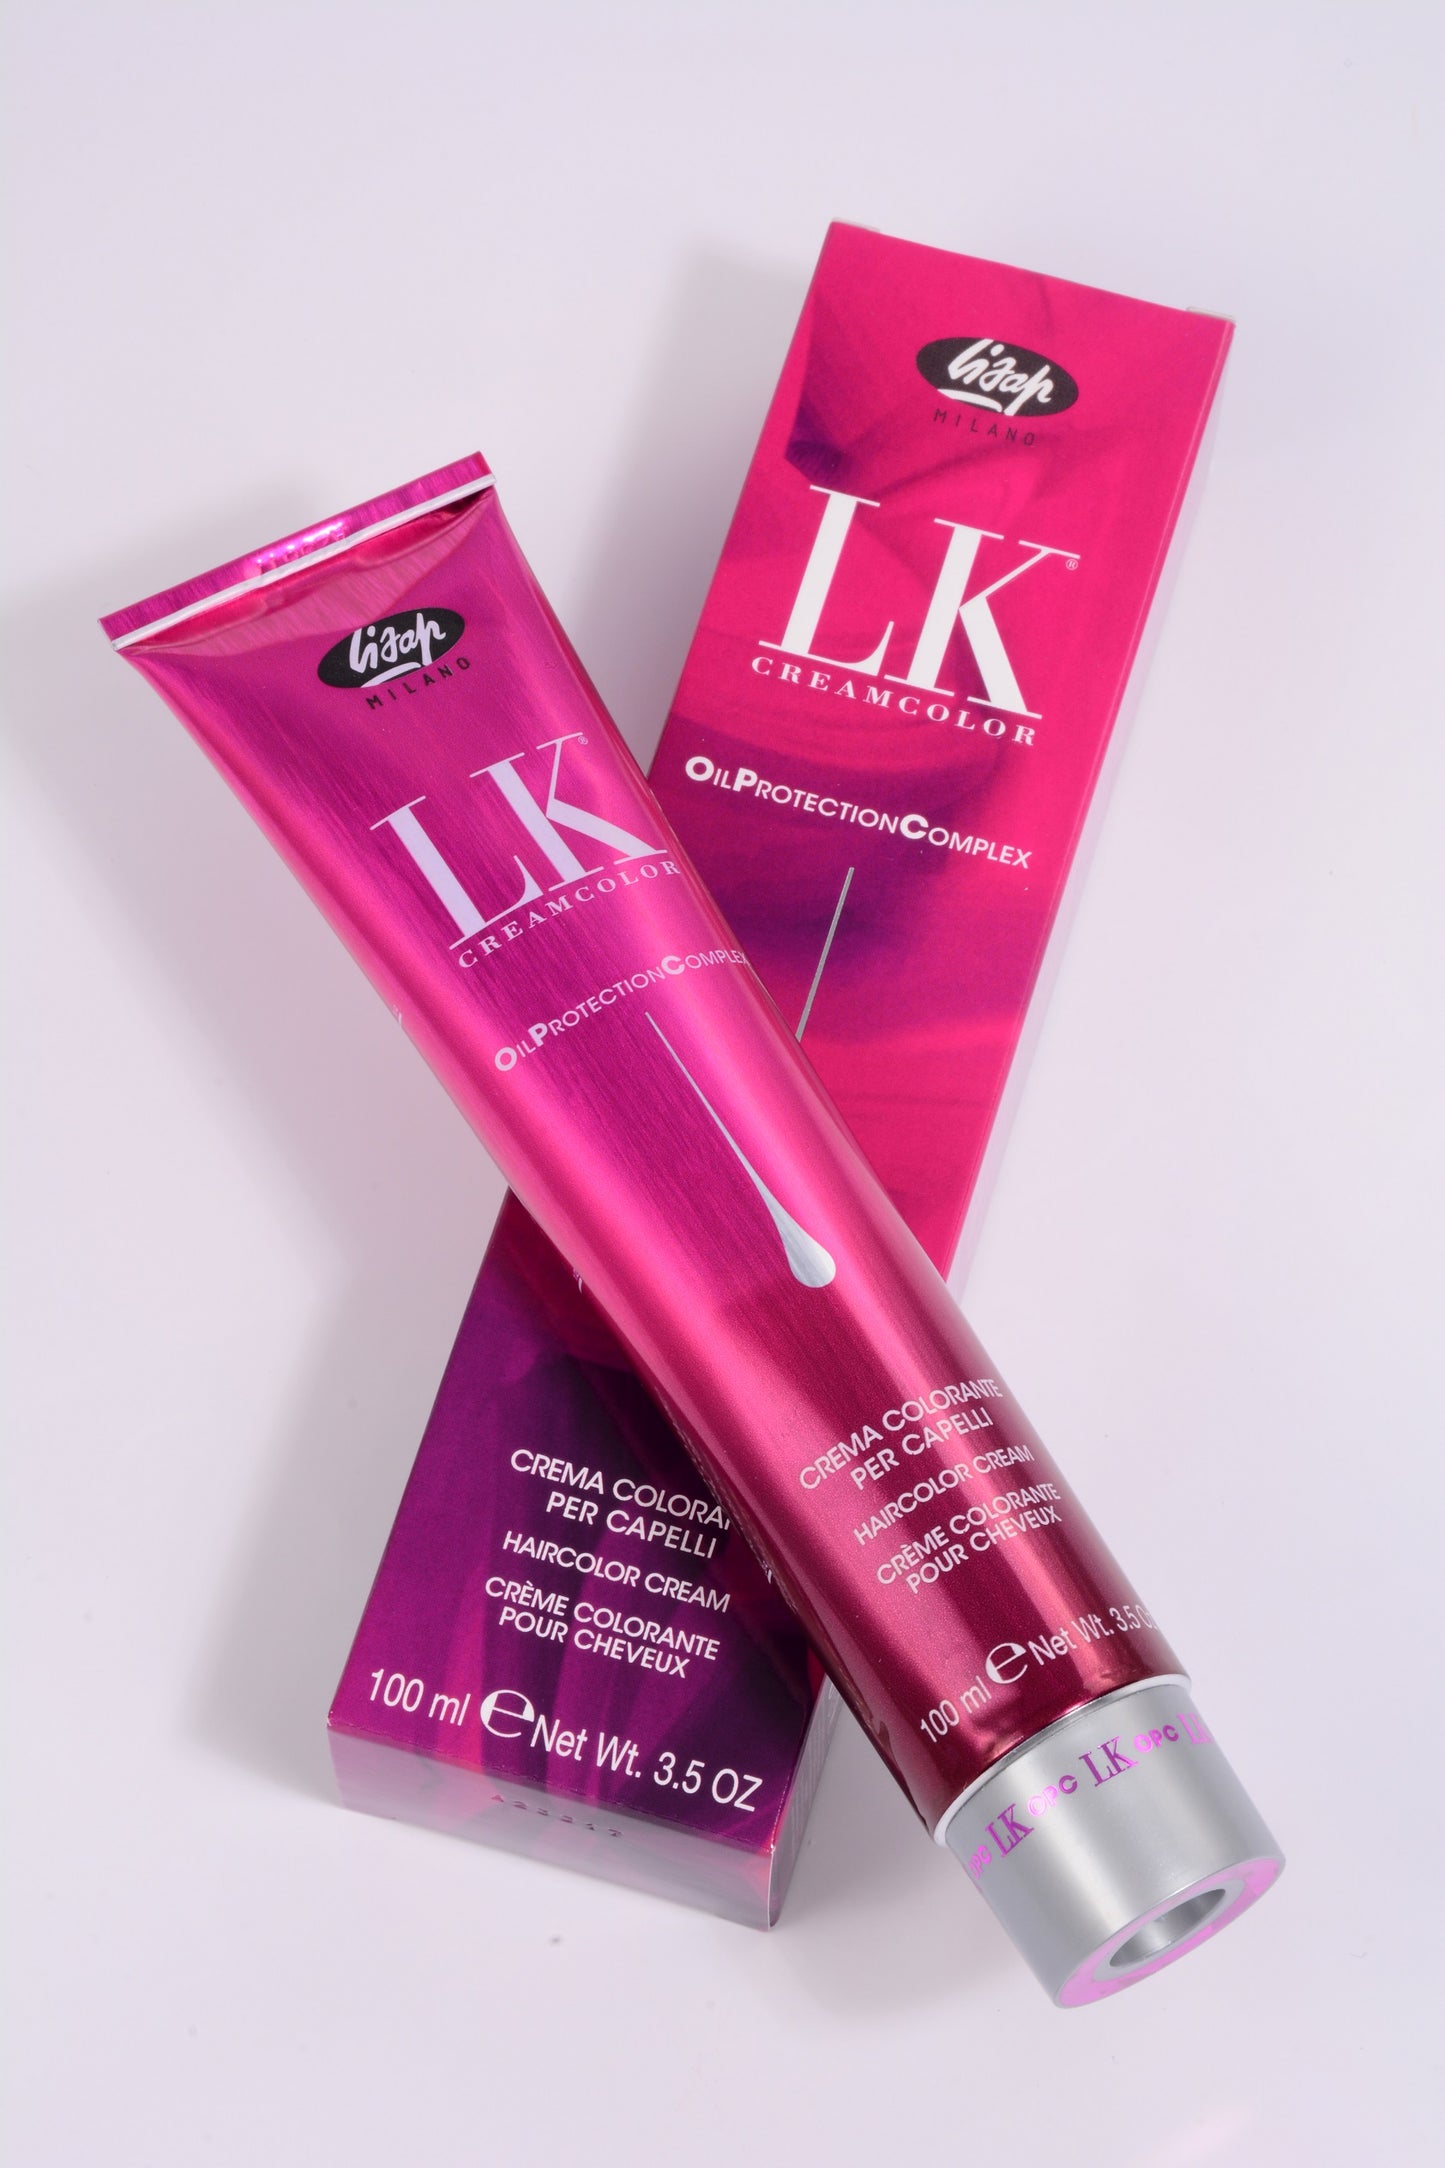 LK Creamcolor 9/72 Oil Protection Complex